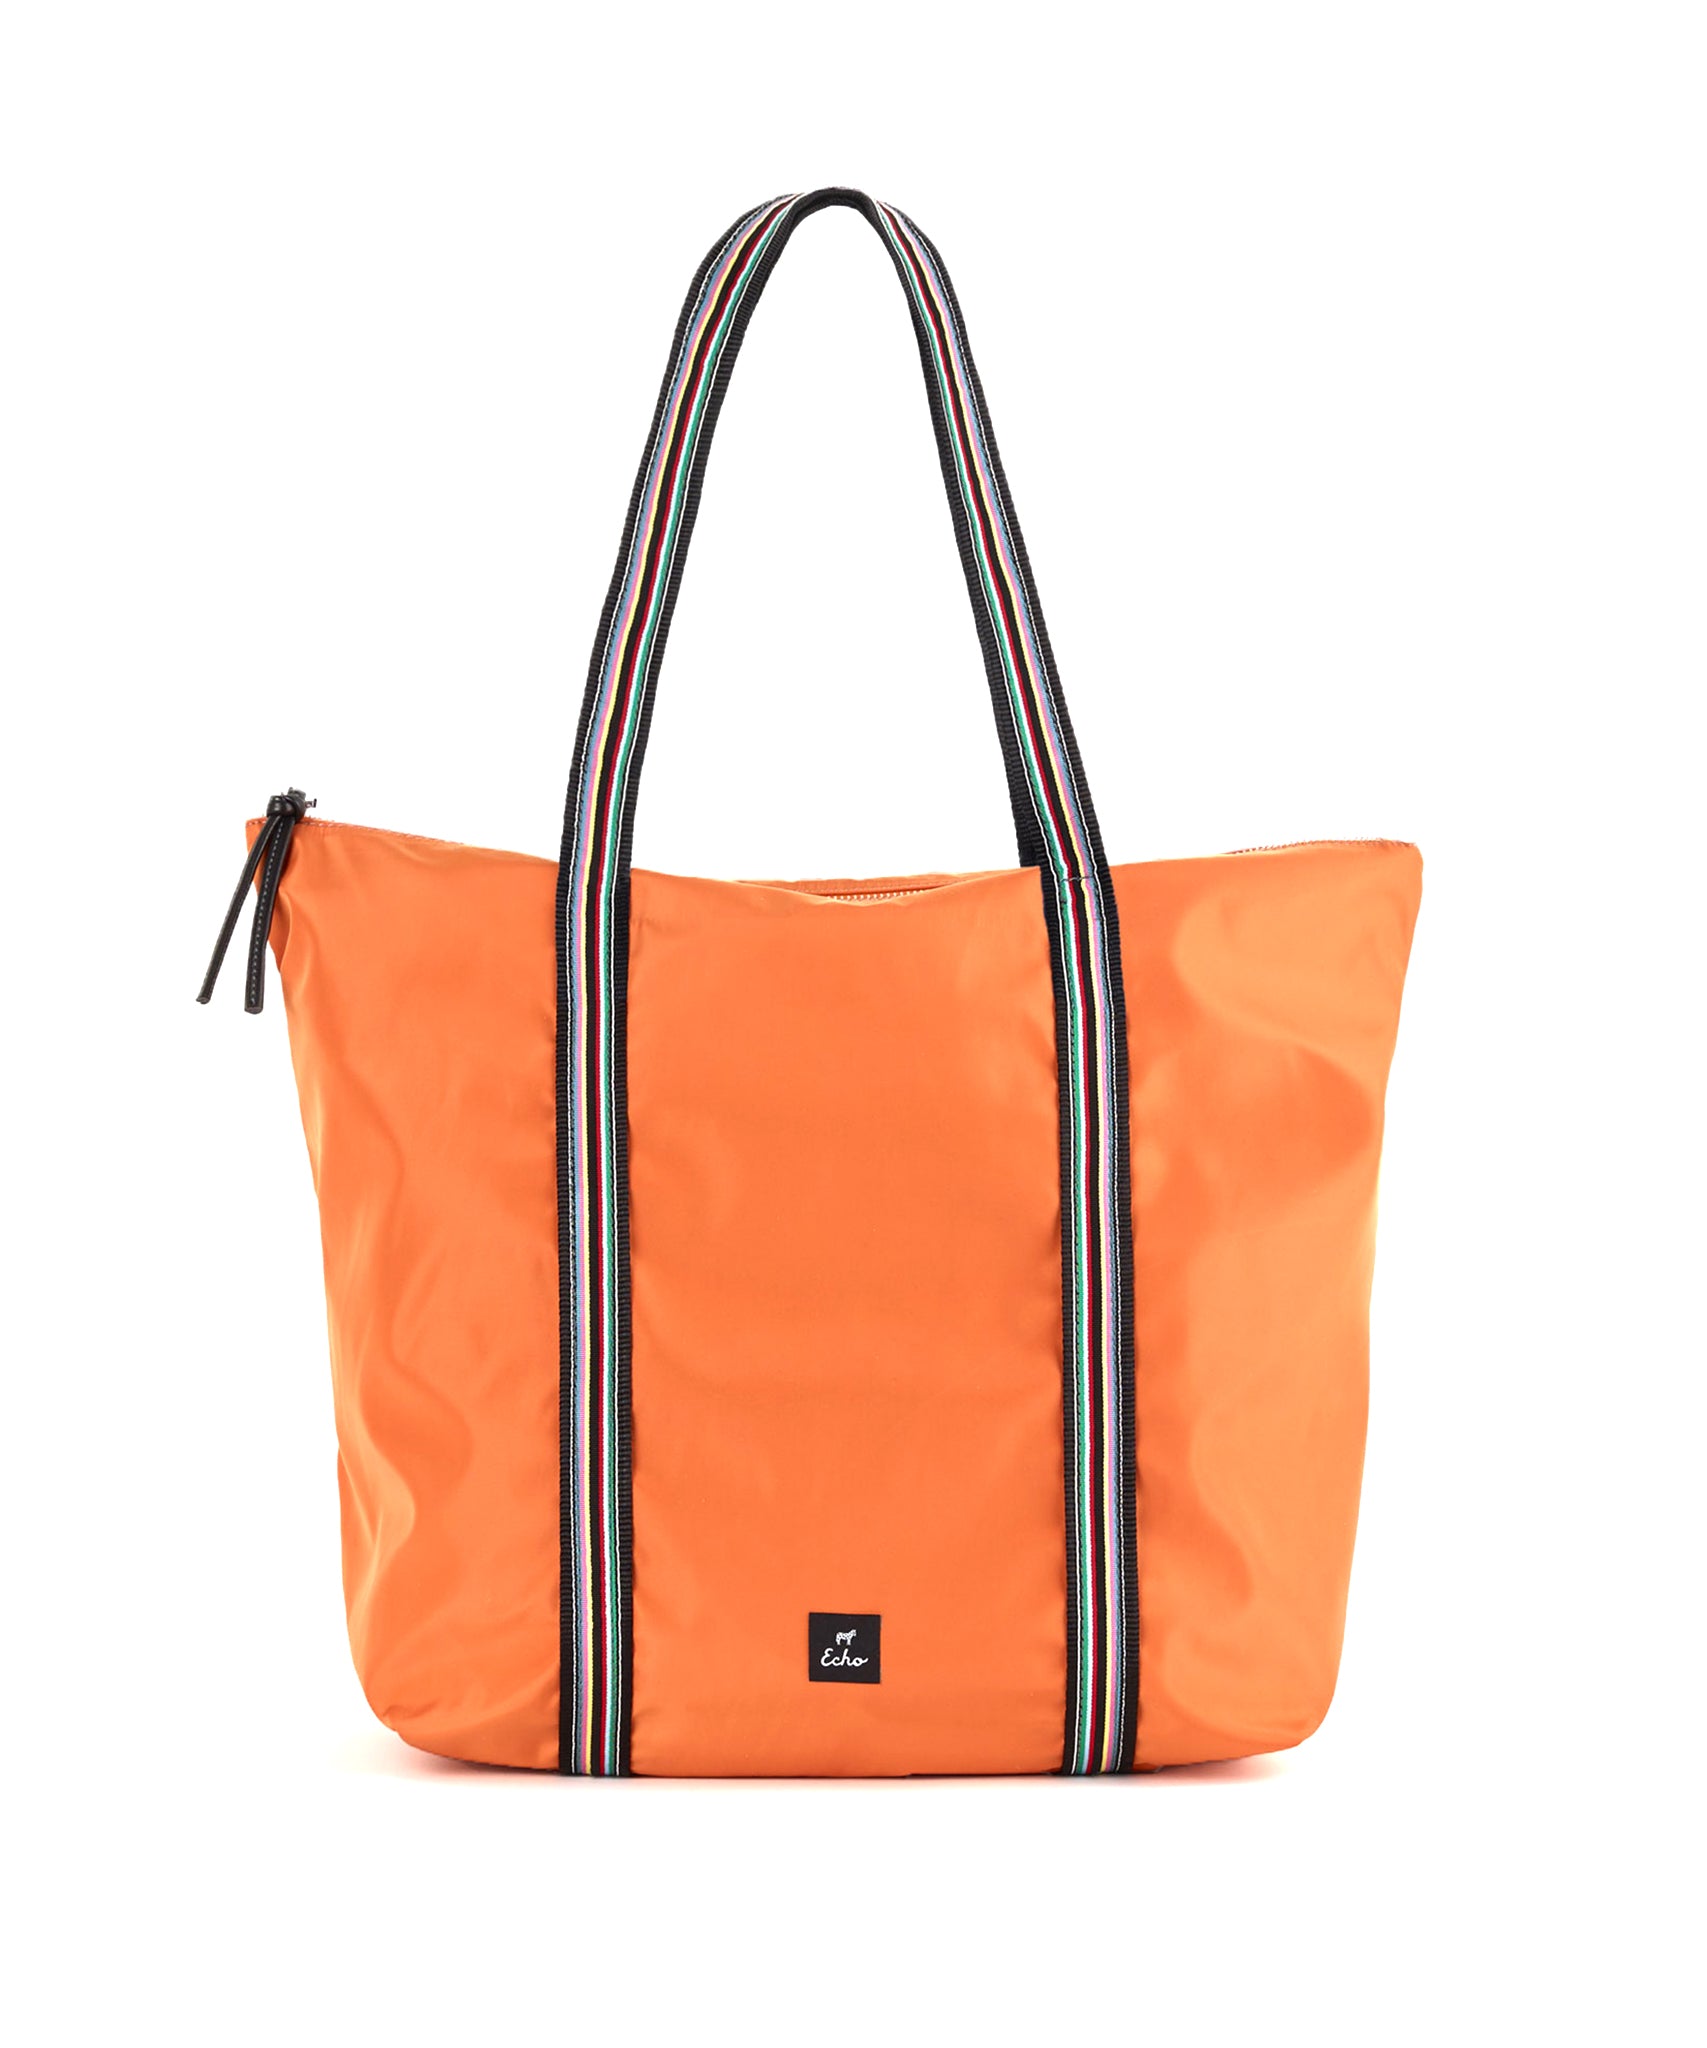 London Tote in color Sunset